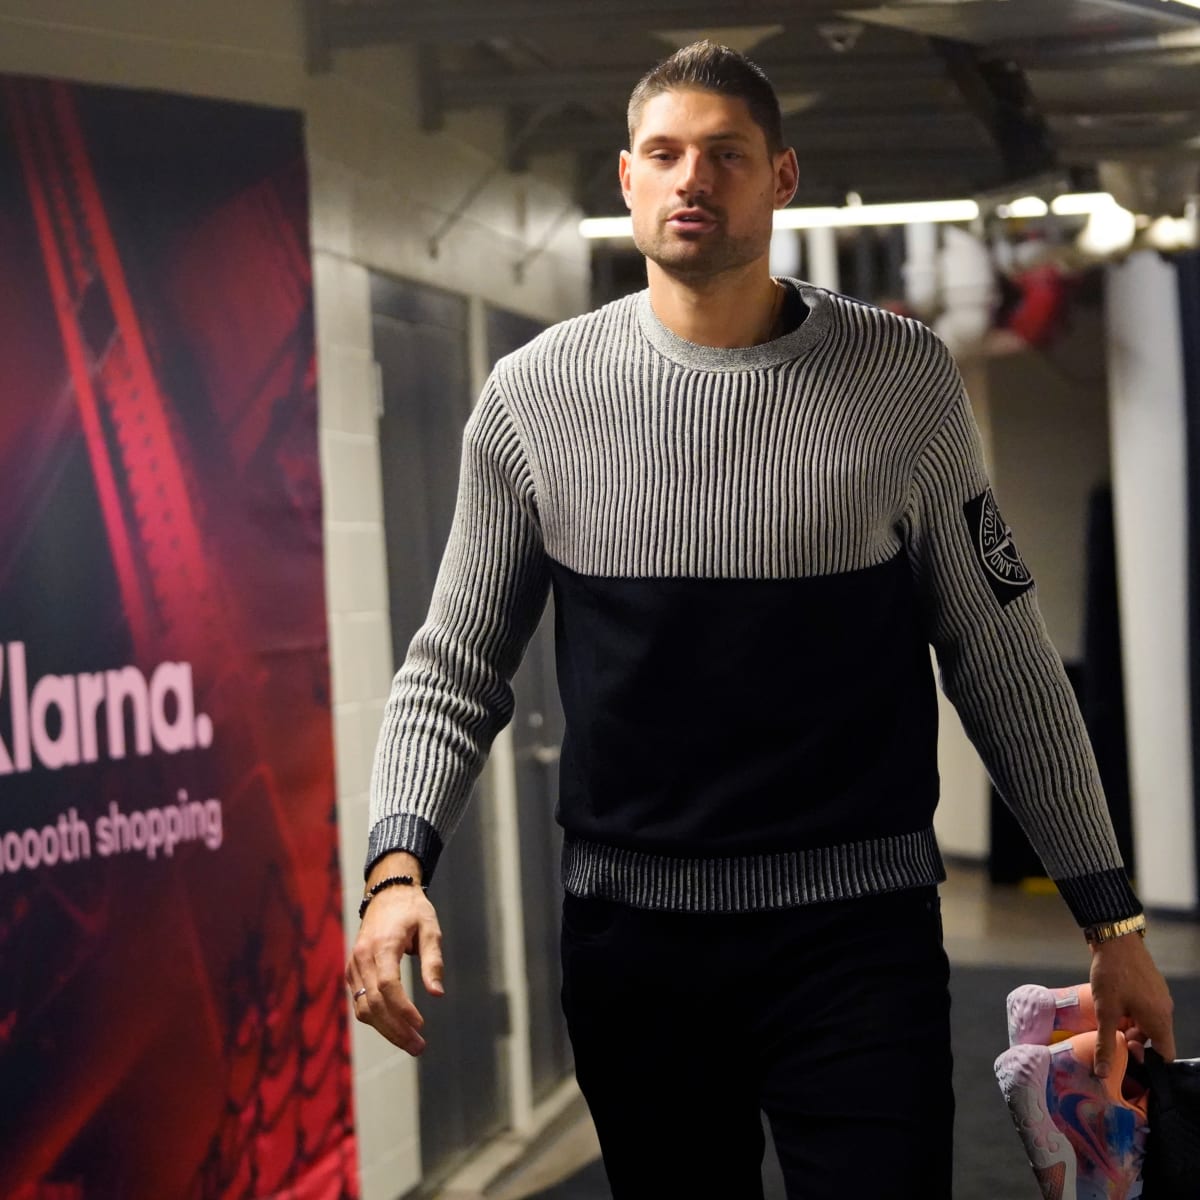 Nikola Vucevic is looking forward to being utilized more - Sports  Illustrated Chicago Bulls News, Analysis and More